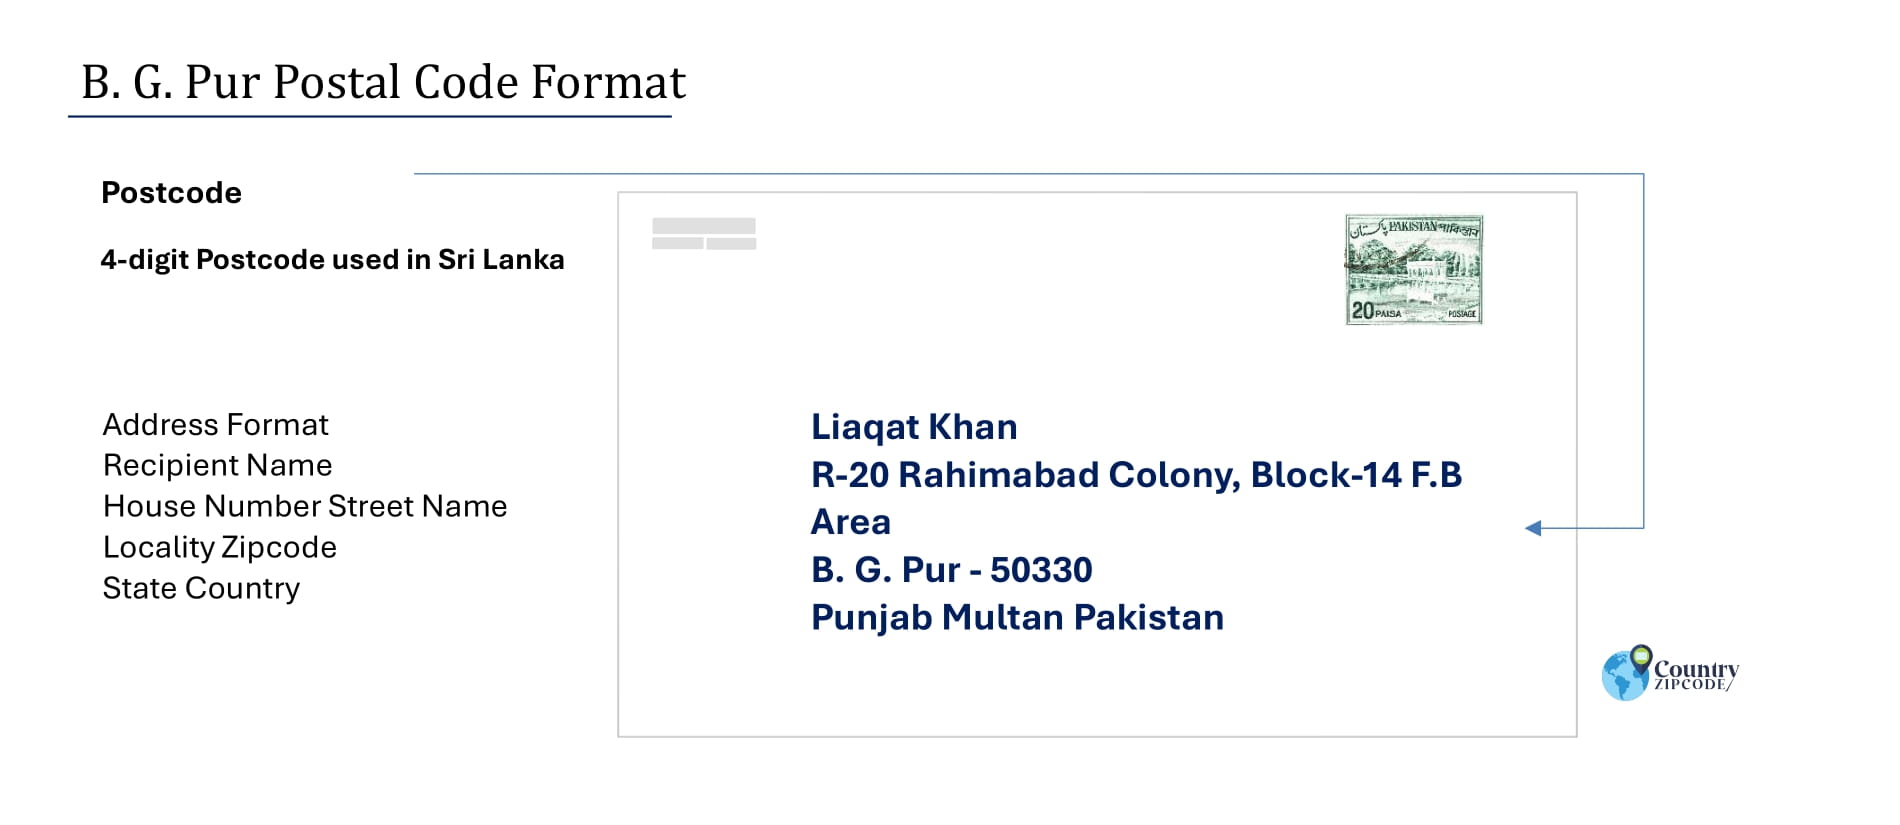 Example of B. G. Pur Pakistan Postal code and Address format